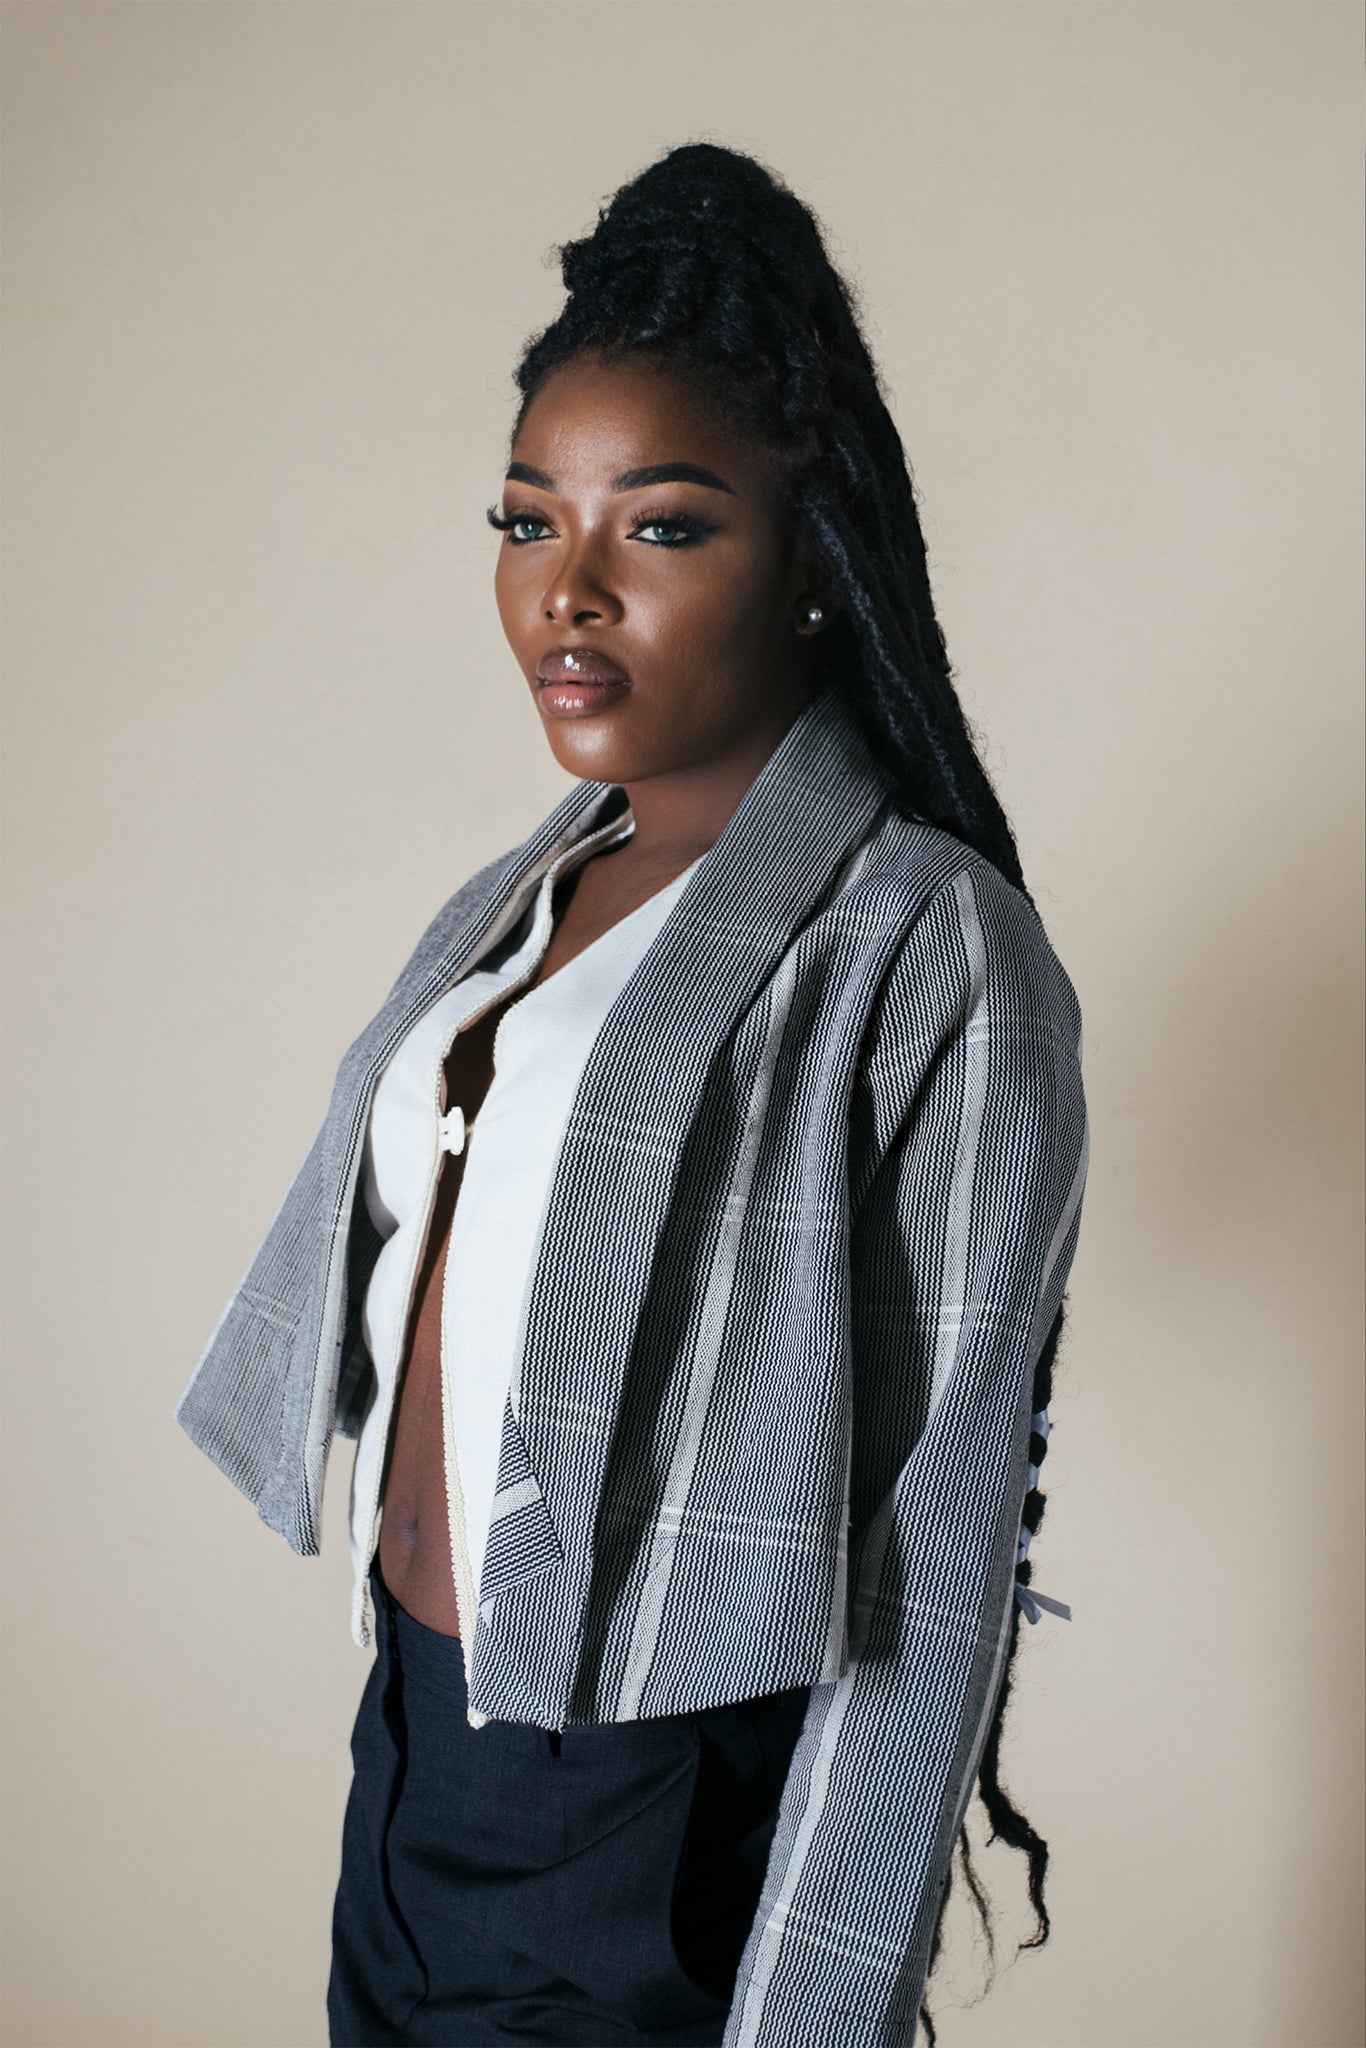 Model in handwoven Abiba Jacket and white shirt stand, exuding a professional yet enigmatic vibe.